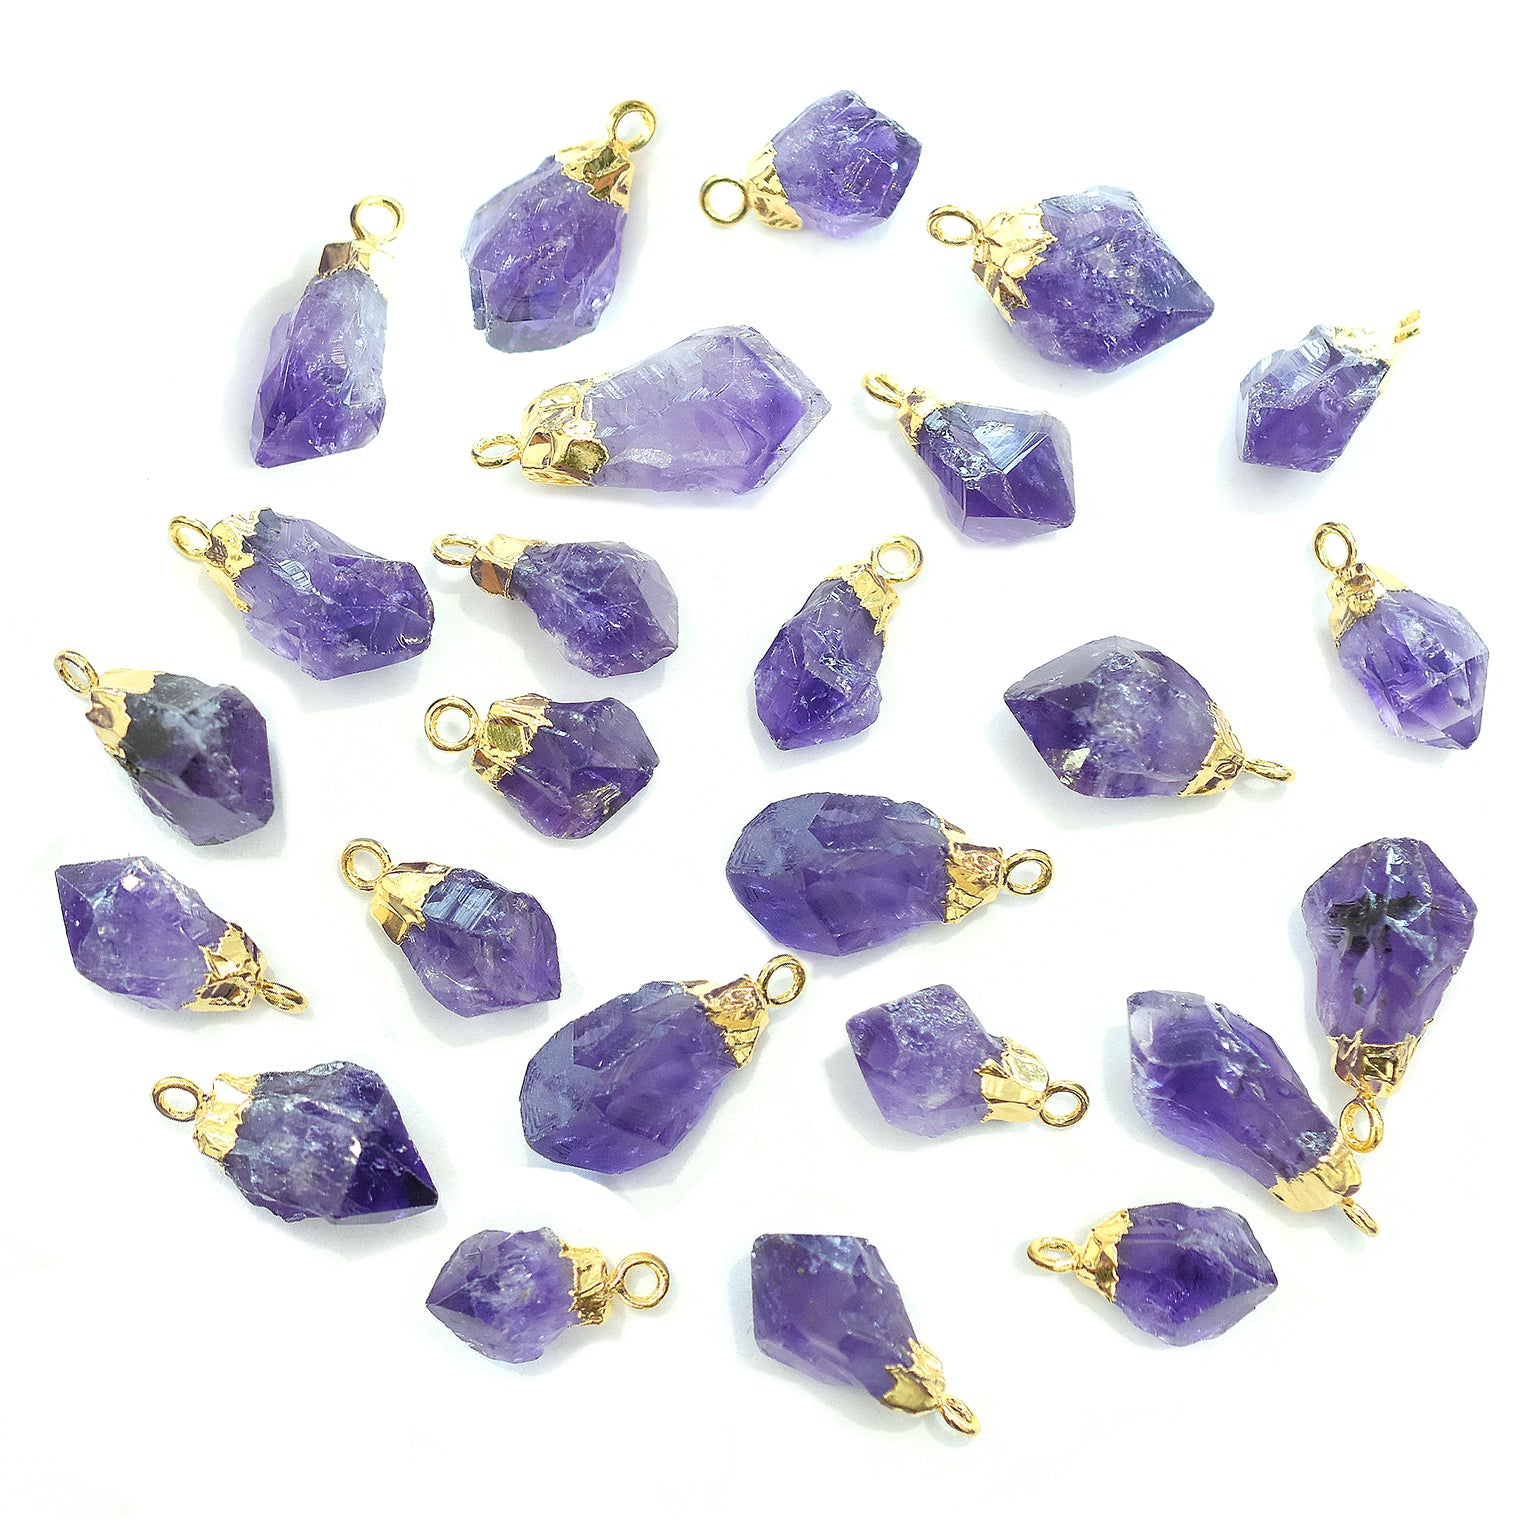 Amethyst 8X5 To 10X6 MM Rough Shape Gold Electroplated Pendant (Set Of 2 Pcs)